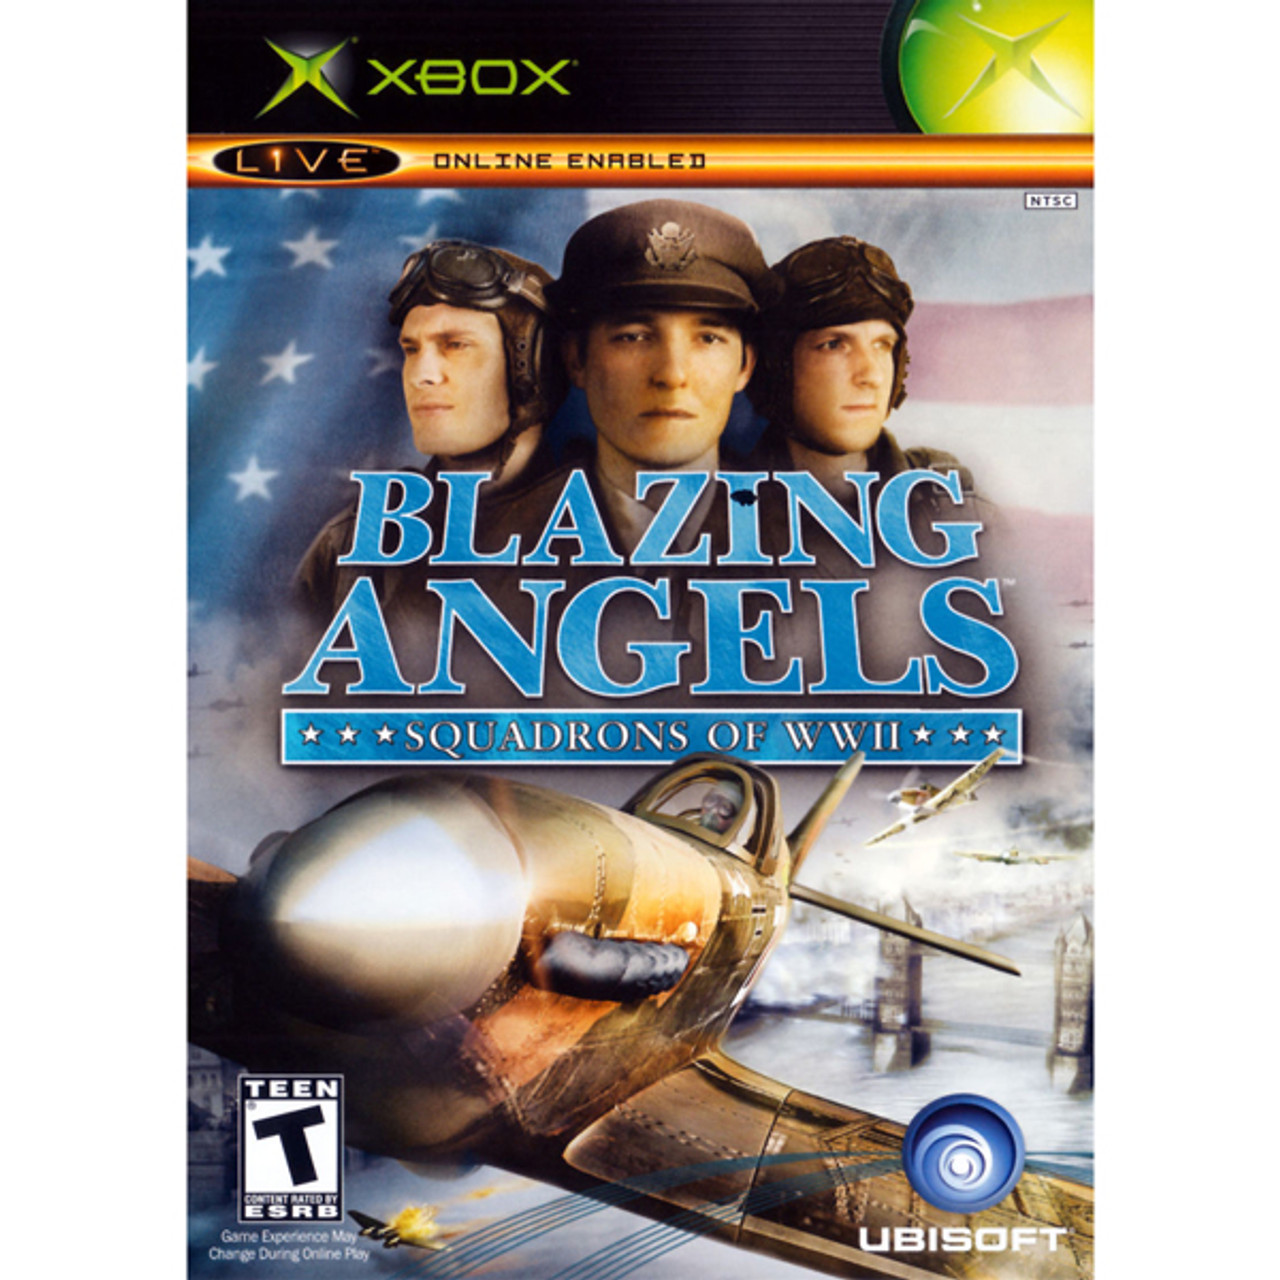 Blazing Angels Squadrons Of WWII - Xbox Game